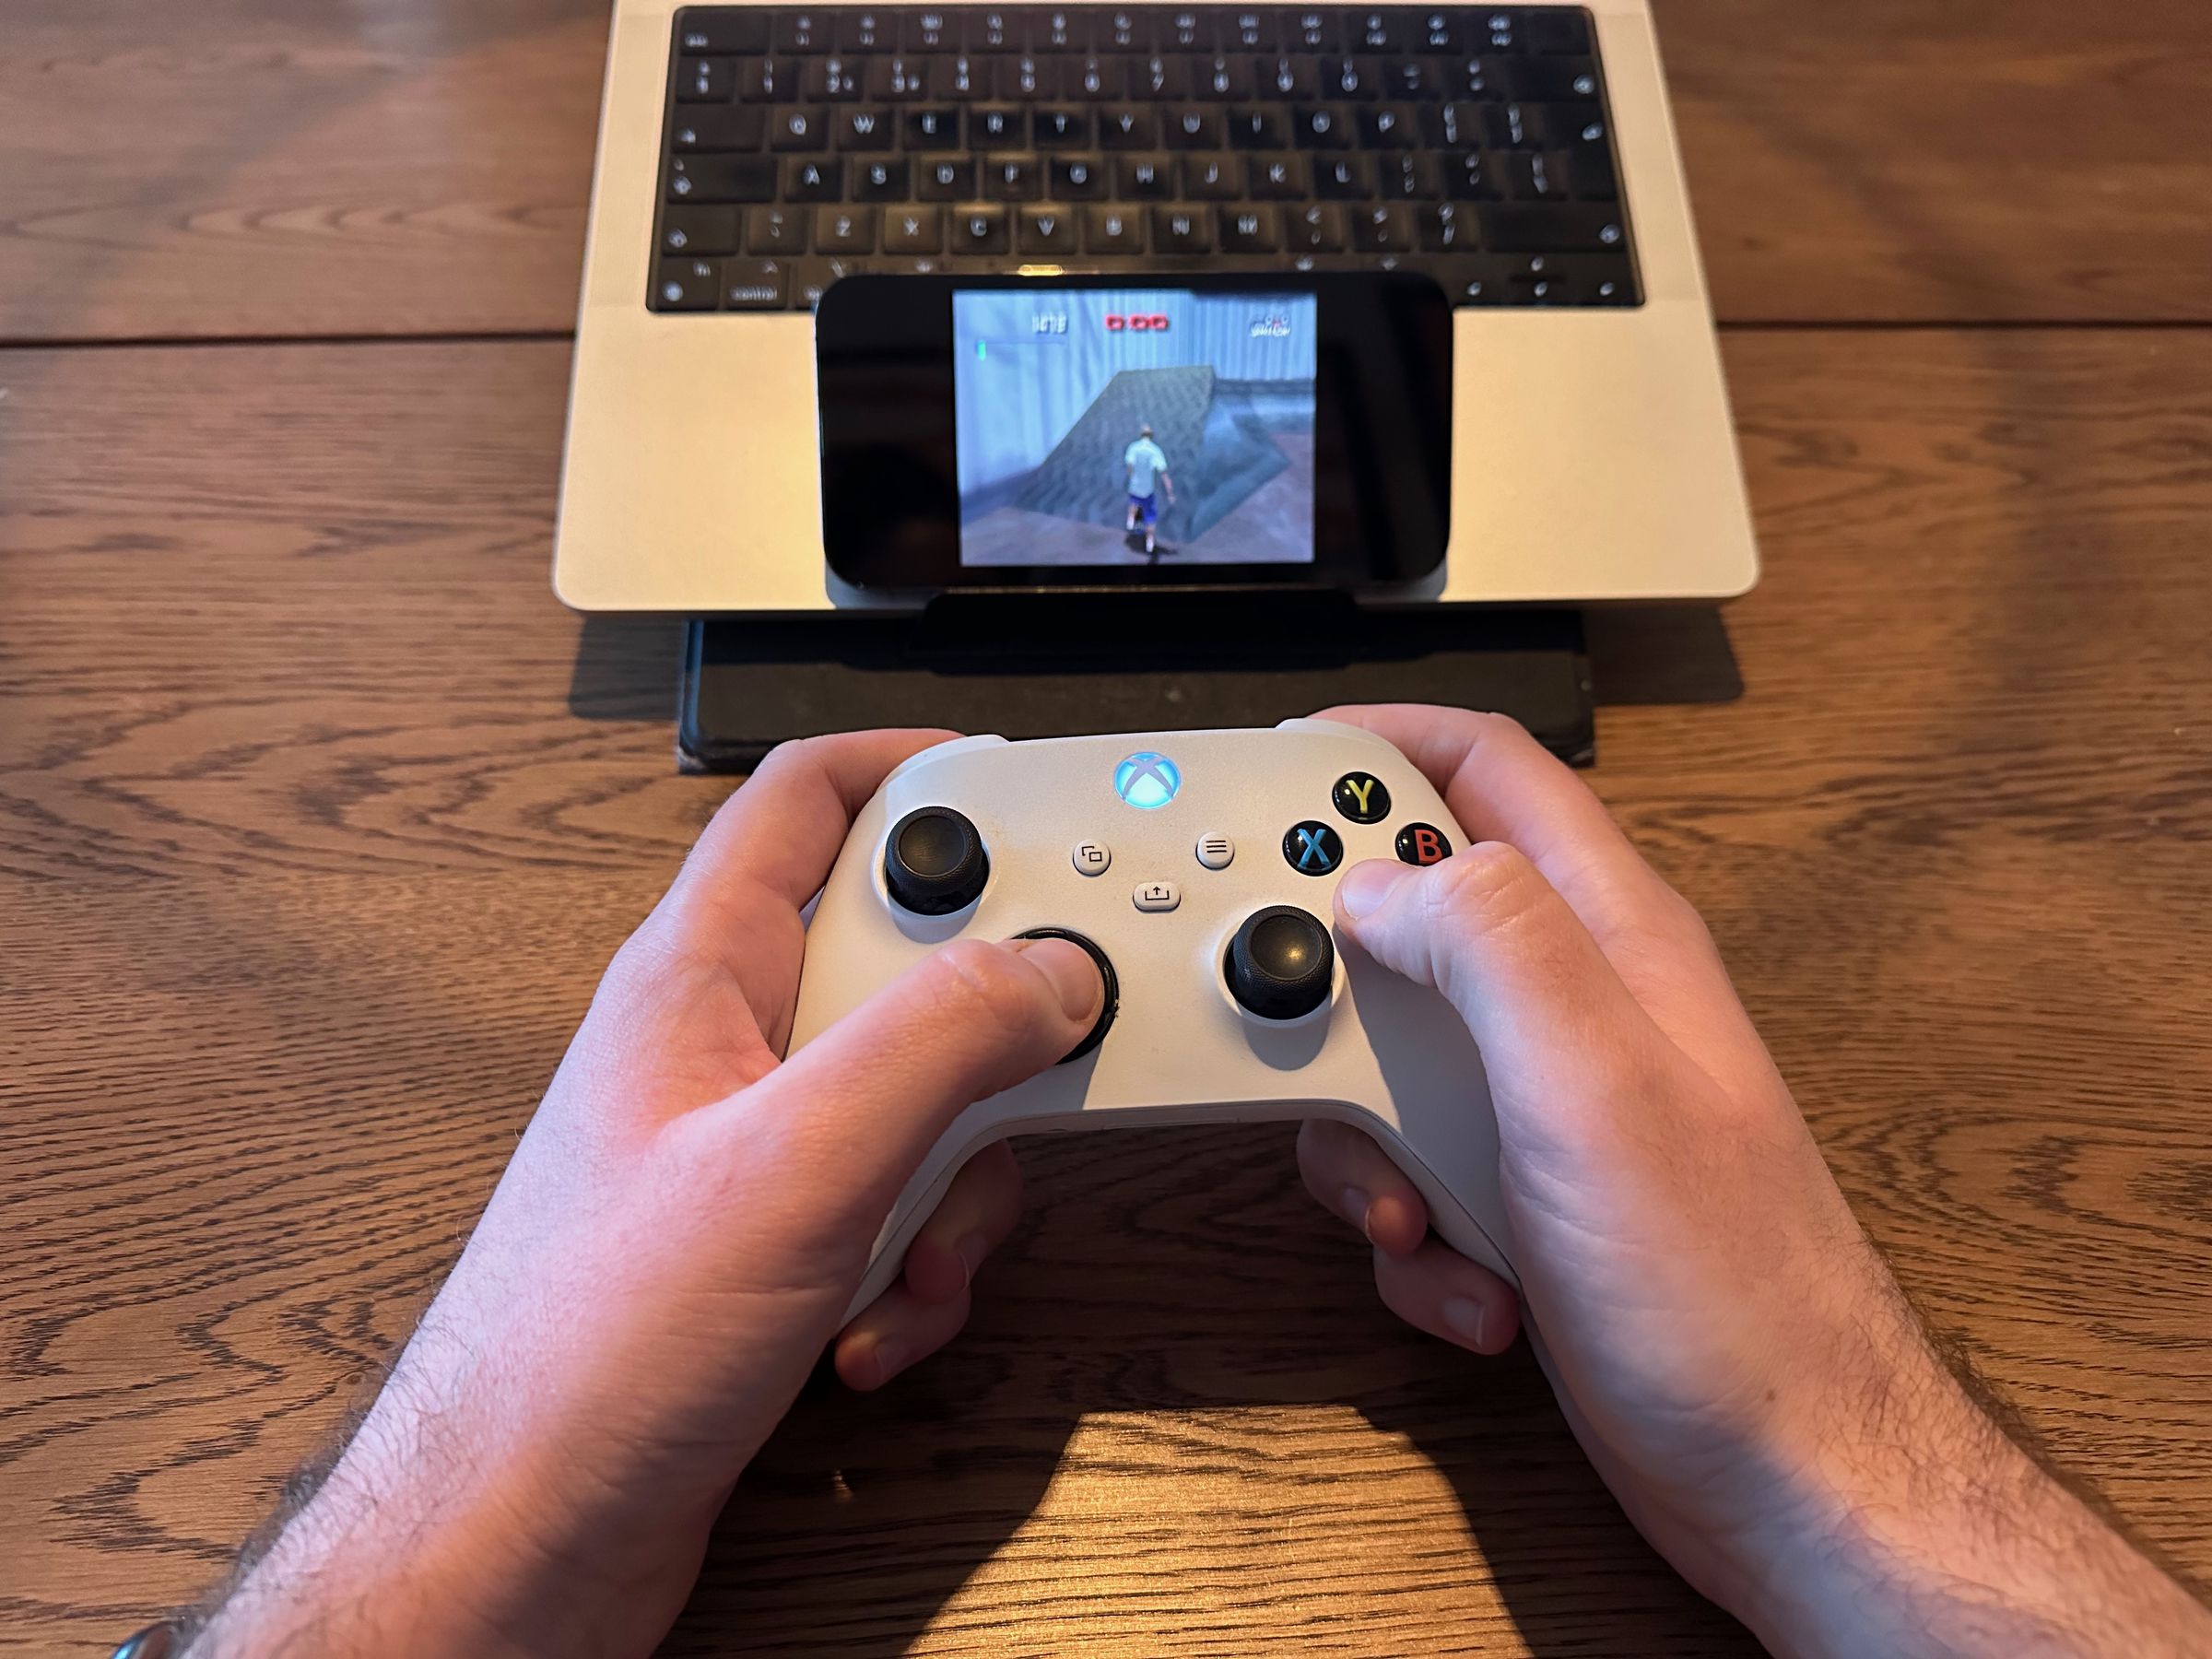 Delta supports horizontal gameplay and external controllers.